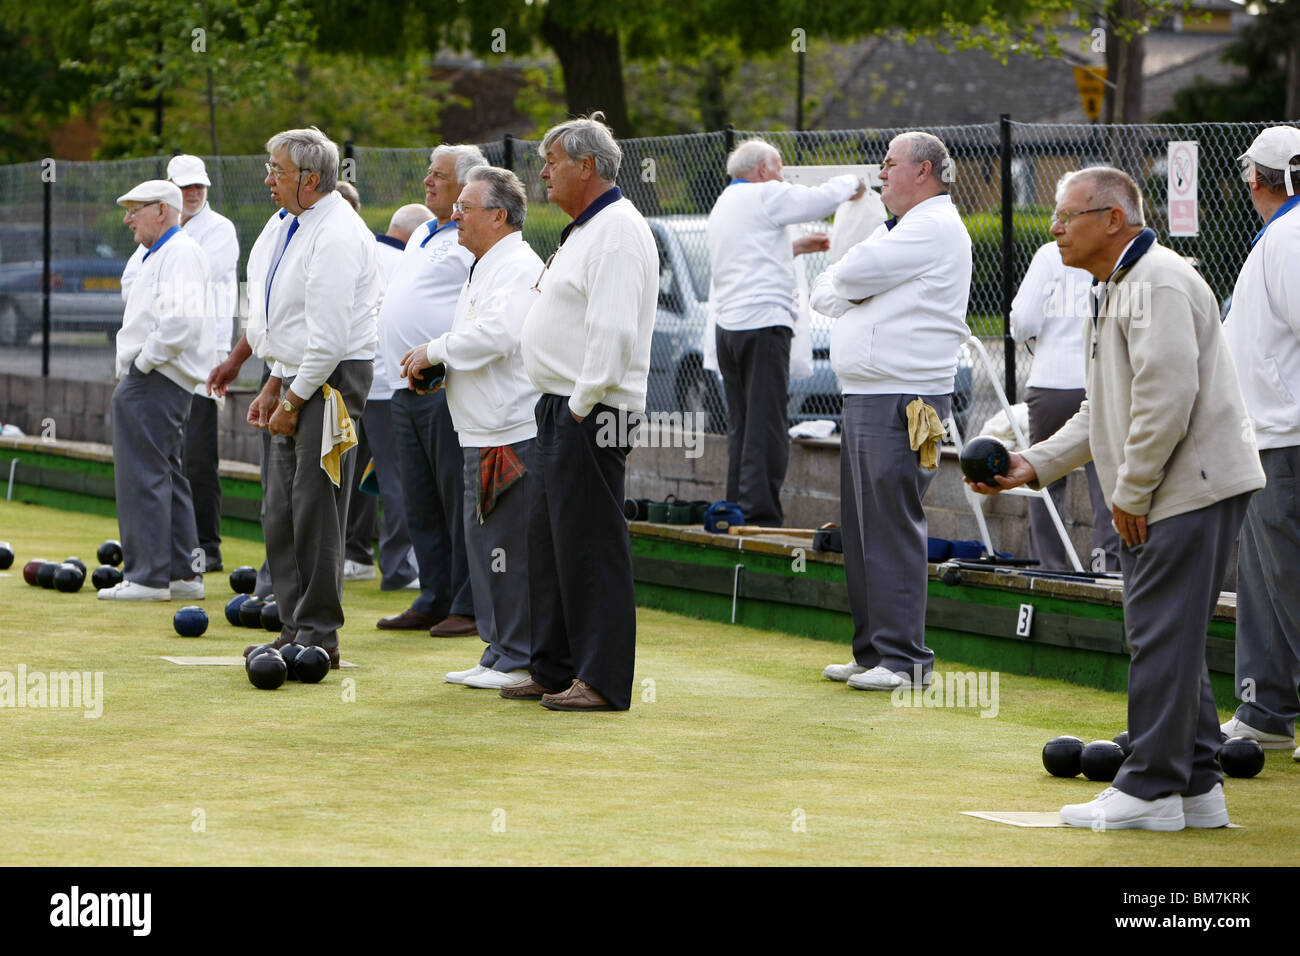 A Crown Green Bowls evening tournament - A nice sedate game for retired people but a very competitive sport played by all ages. Stock Photo